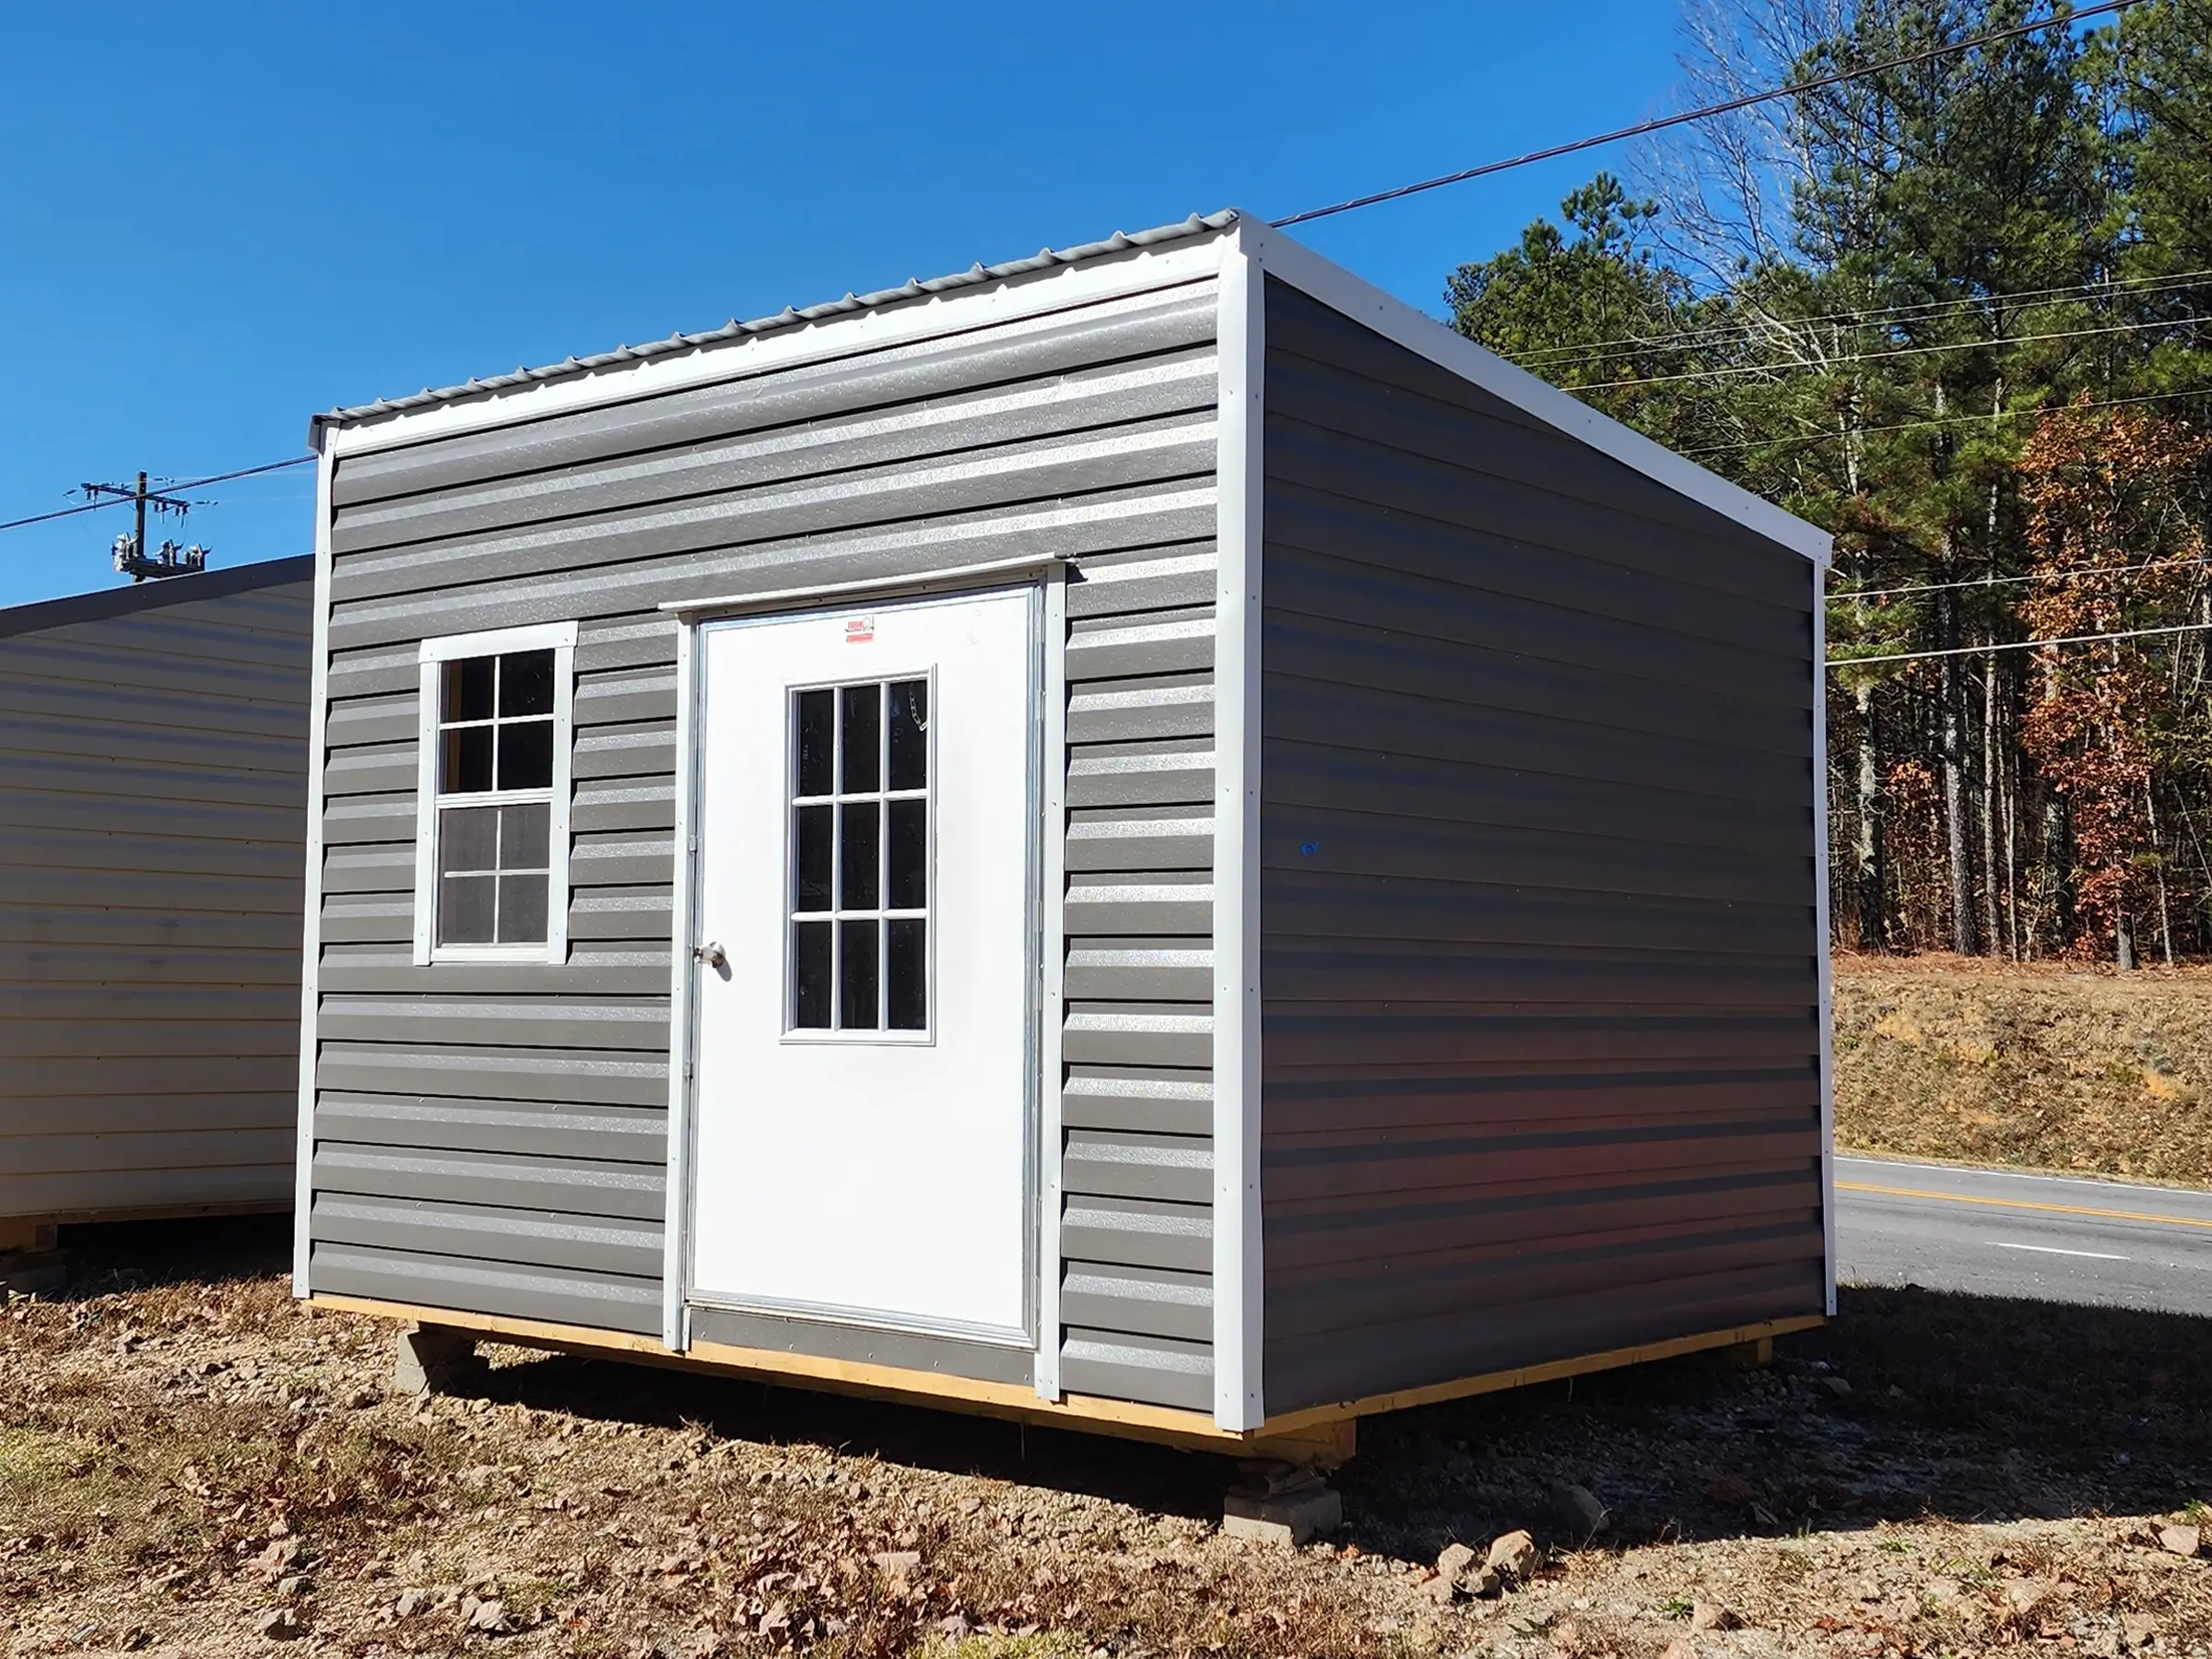 Portable office building in the 10 by 12 size with a modern single sloped roof look.